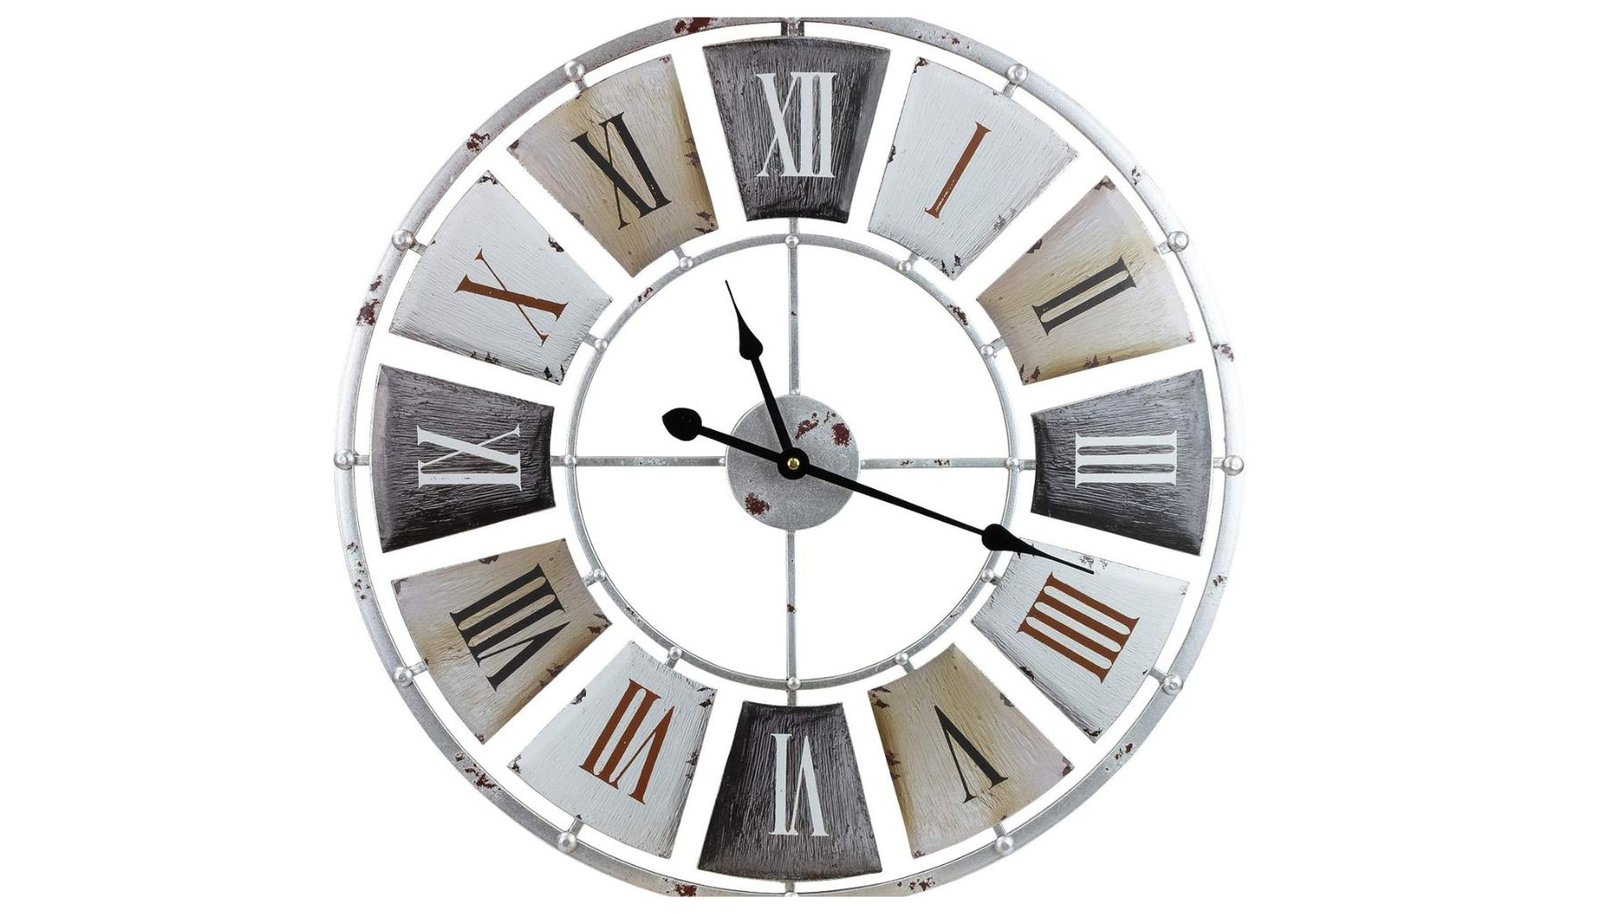 Sorbus 24-Inch Vintage Wall Clock Review